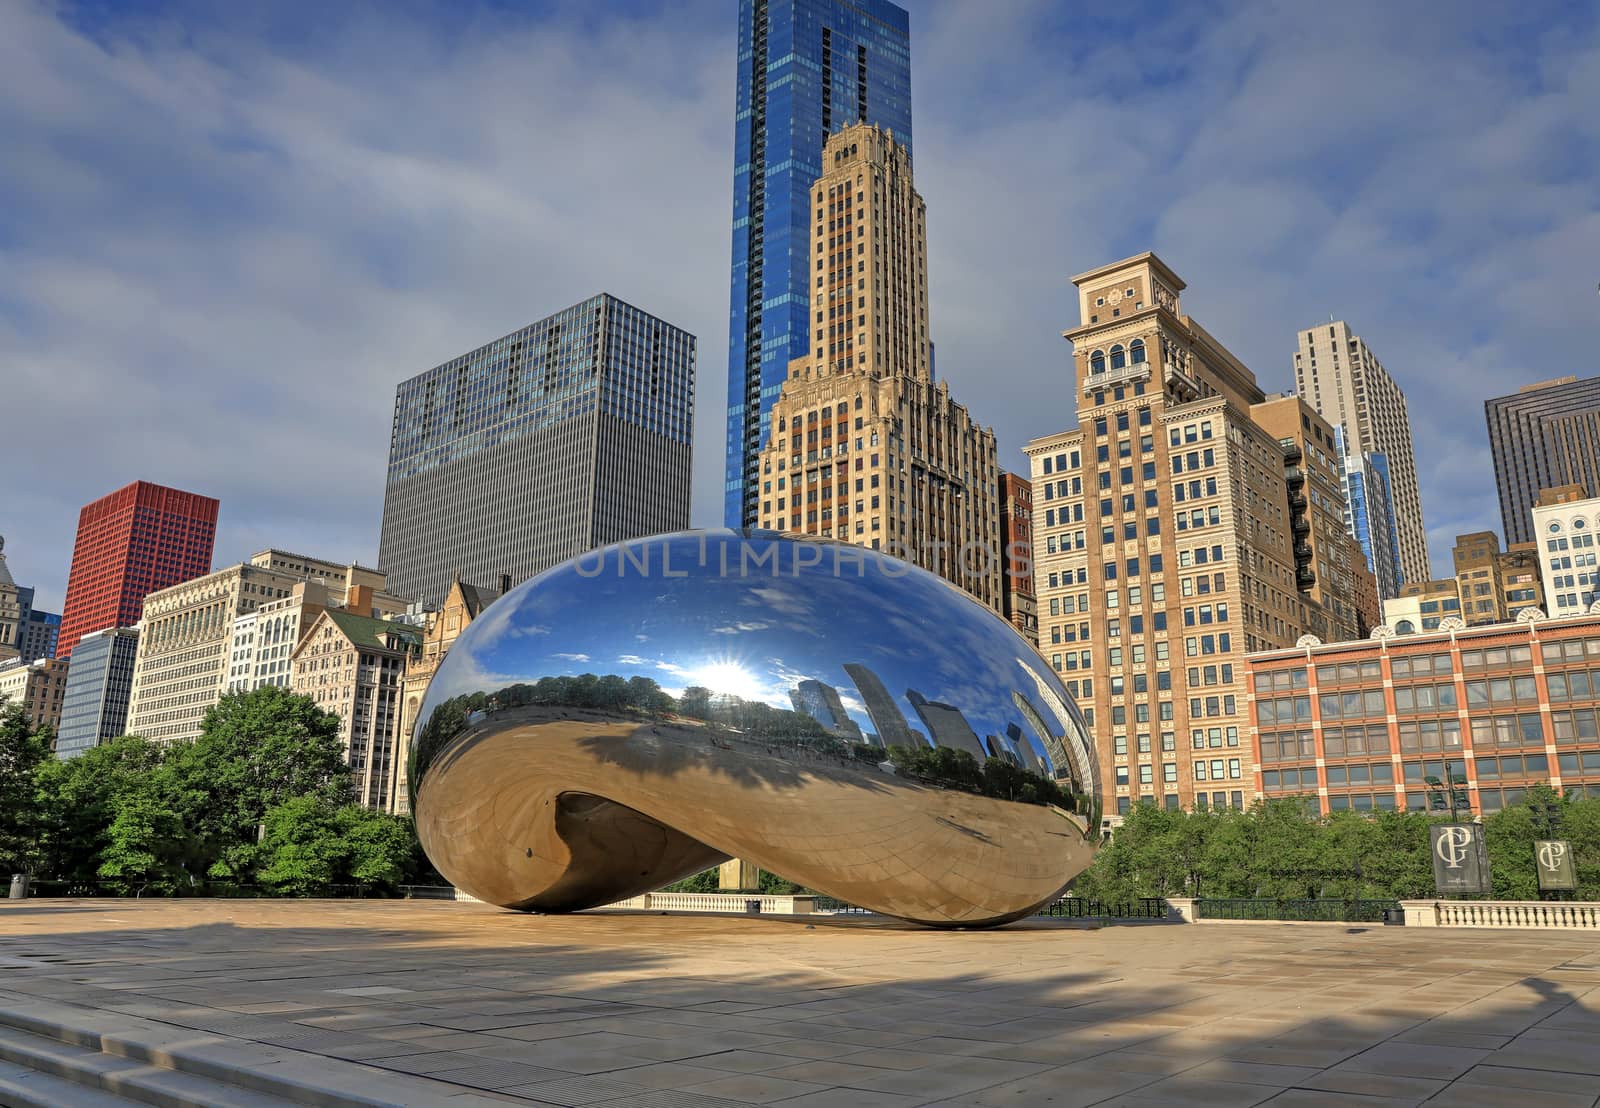 Chicago, Illinois, USA - June 23, 2018: The 'Cloud Gate' also known as 'The Bean' in Downtown Chicago.